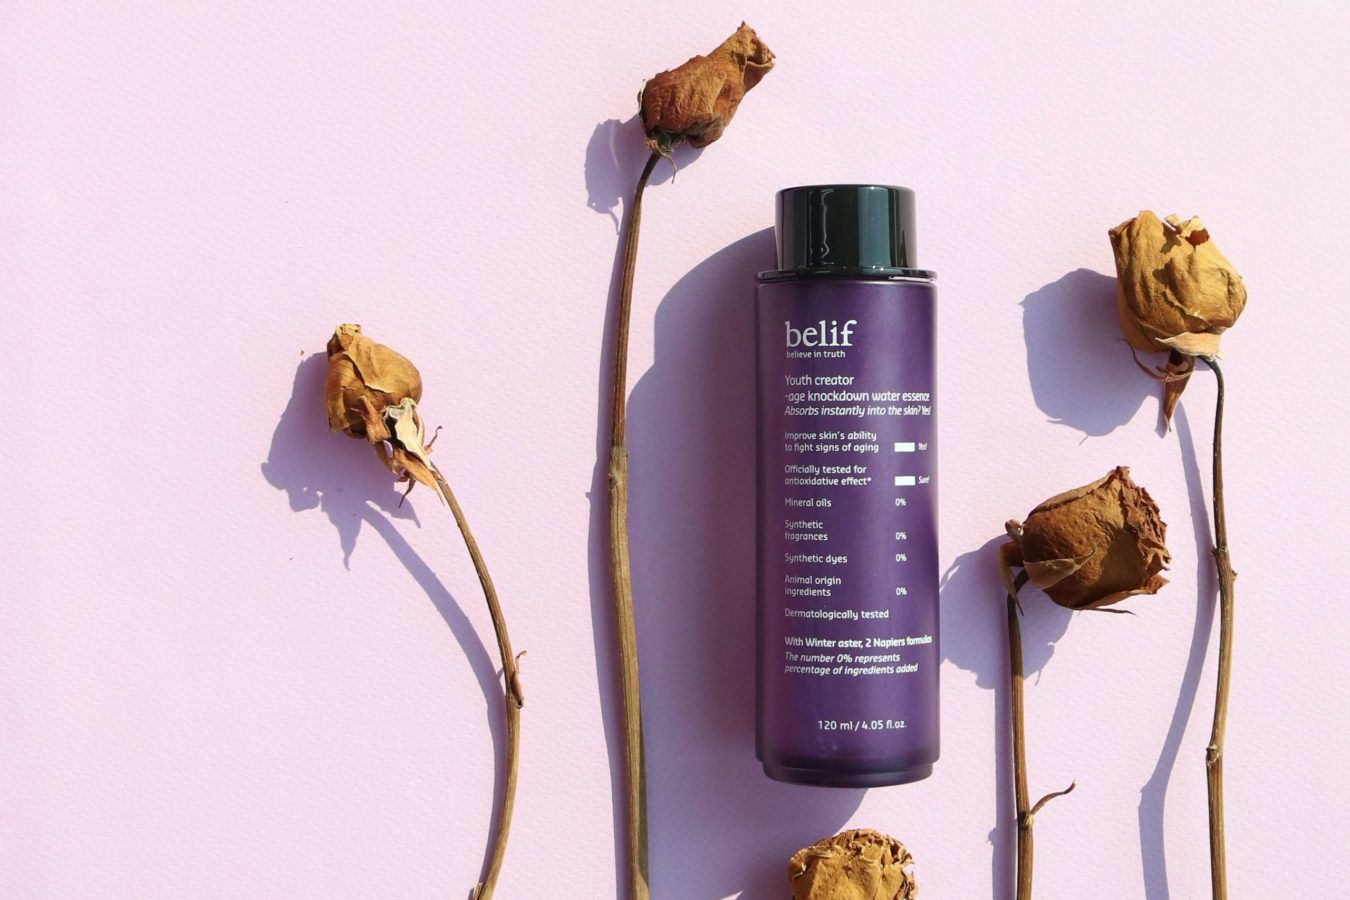 Age Knockdown Bomb vs Prime Infusion Essence? Find out which belif products is best suited for you